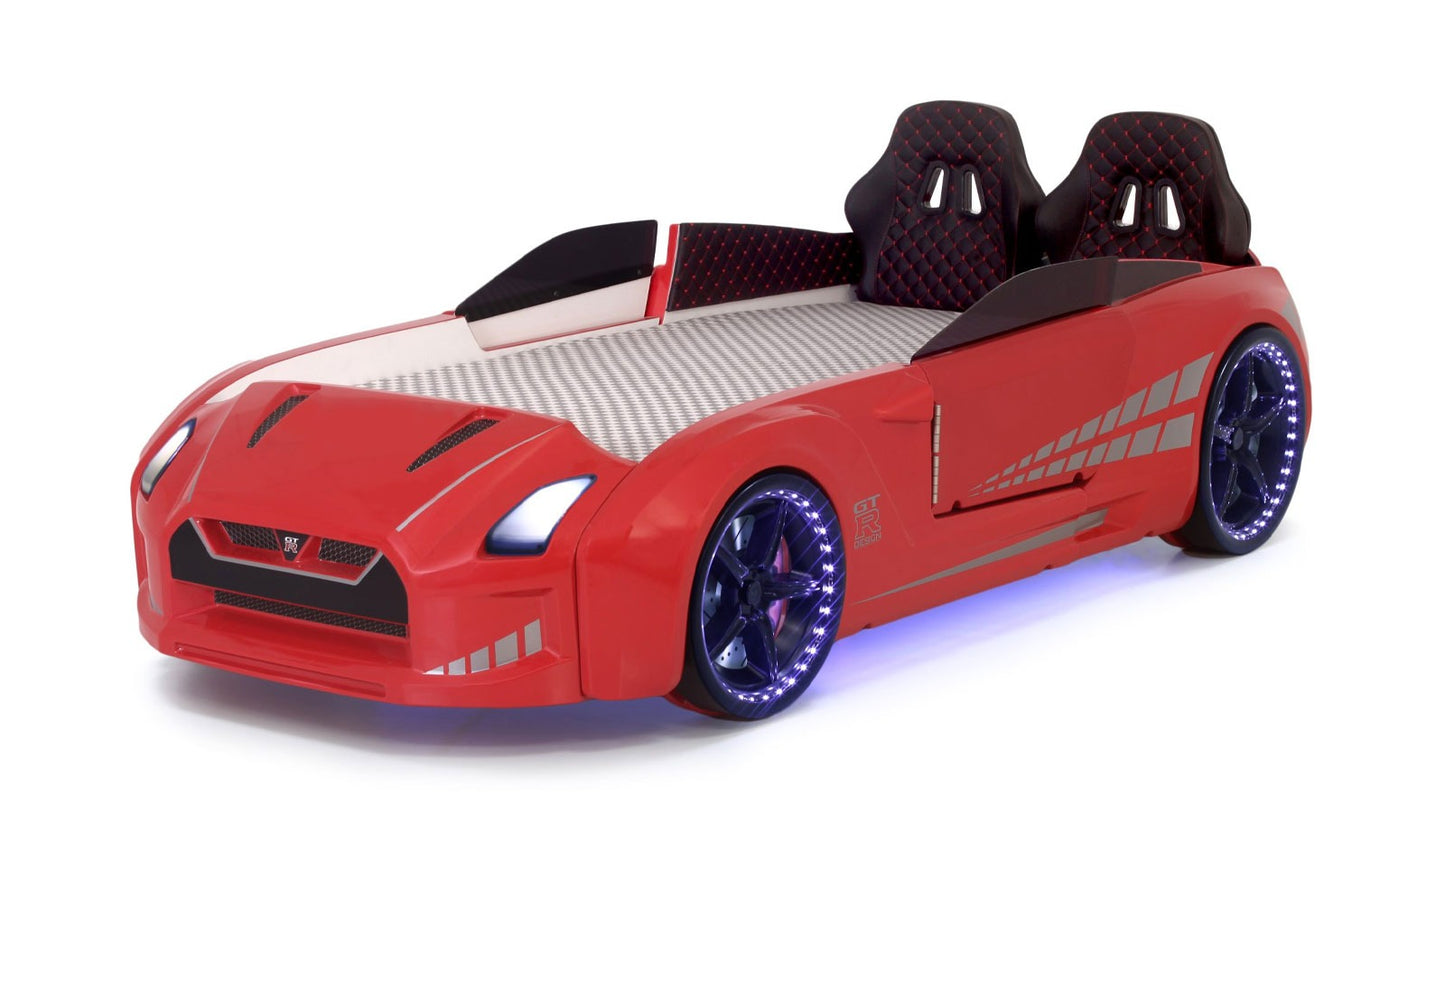 GTR Car Bed - Bluetooth, Leather seats, LED lights